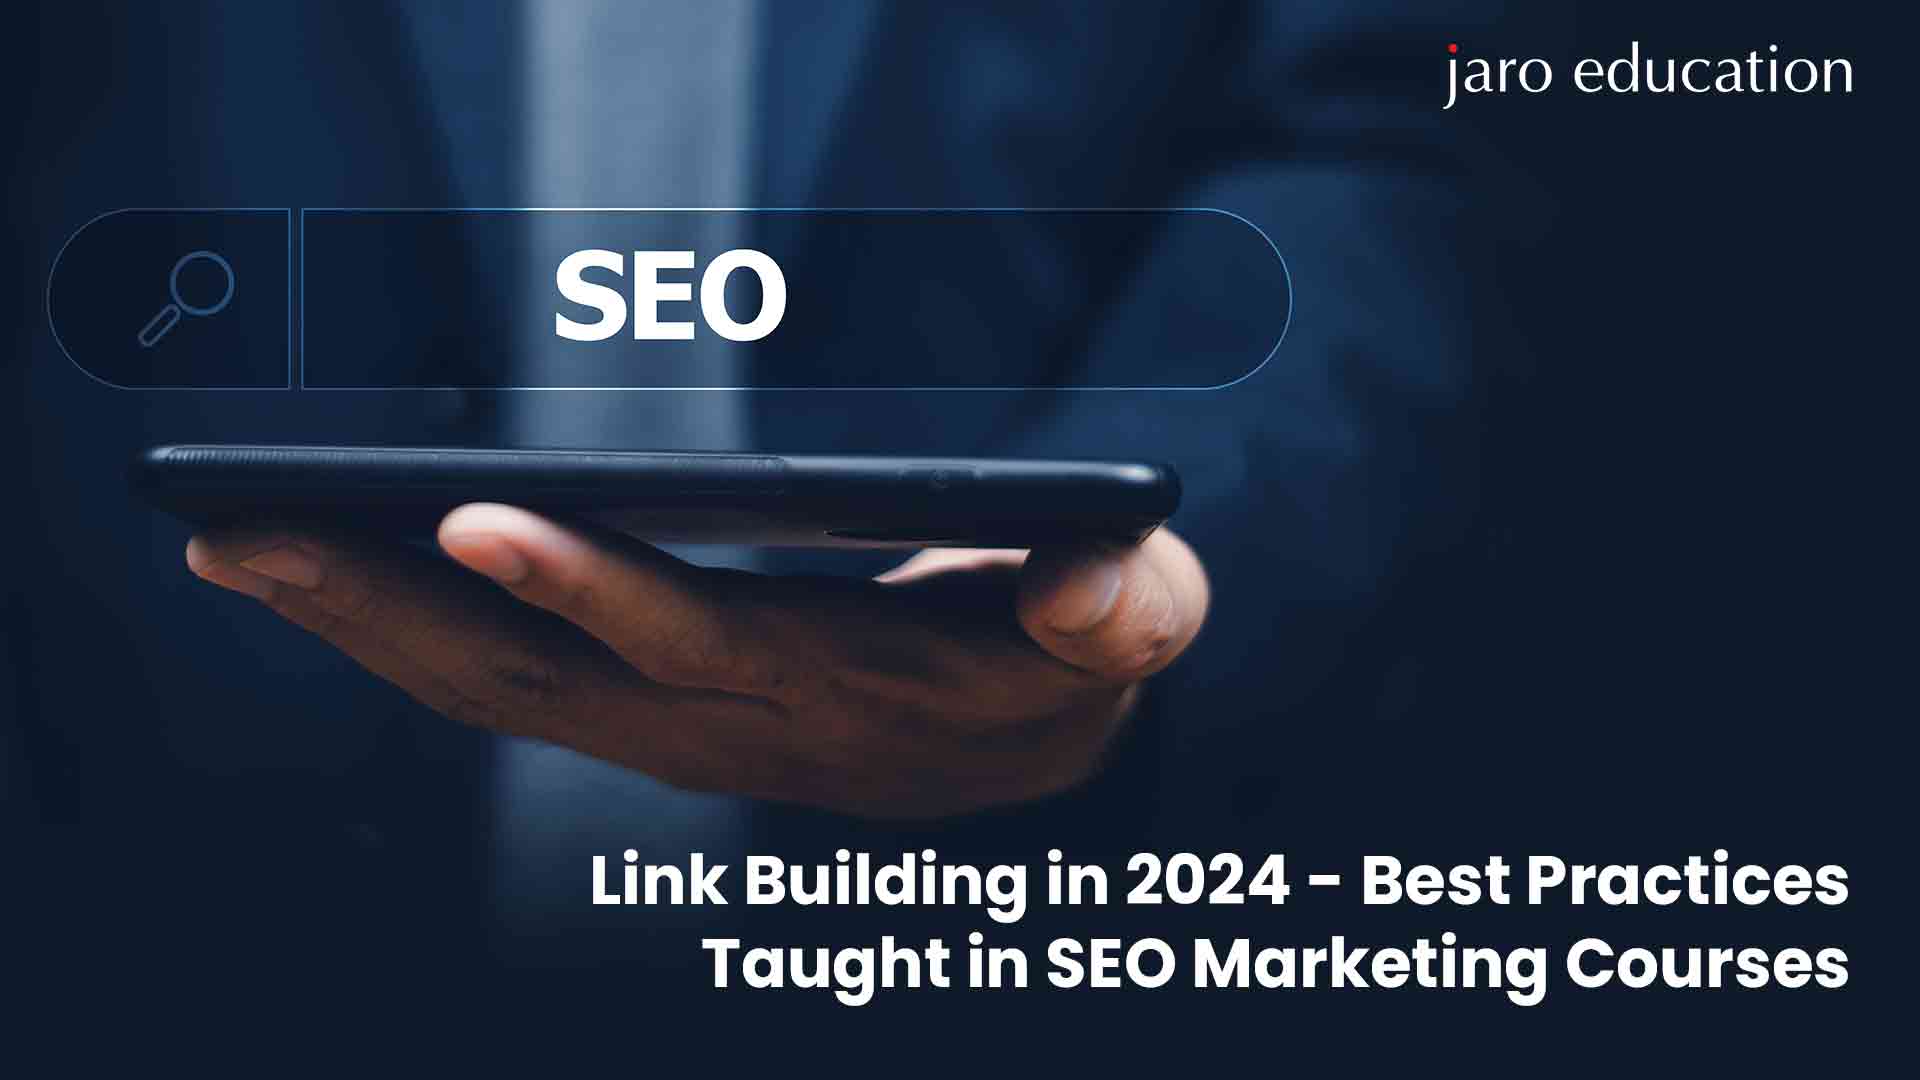 Link Building in 2024 Best Practices Taught in SEO Marketing Courses